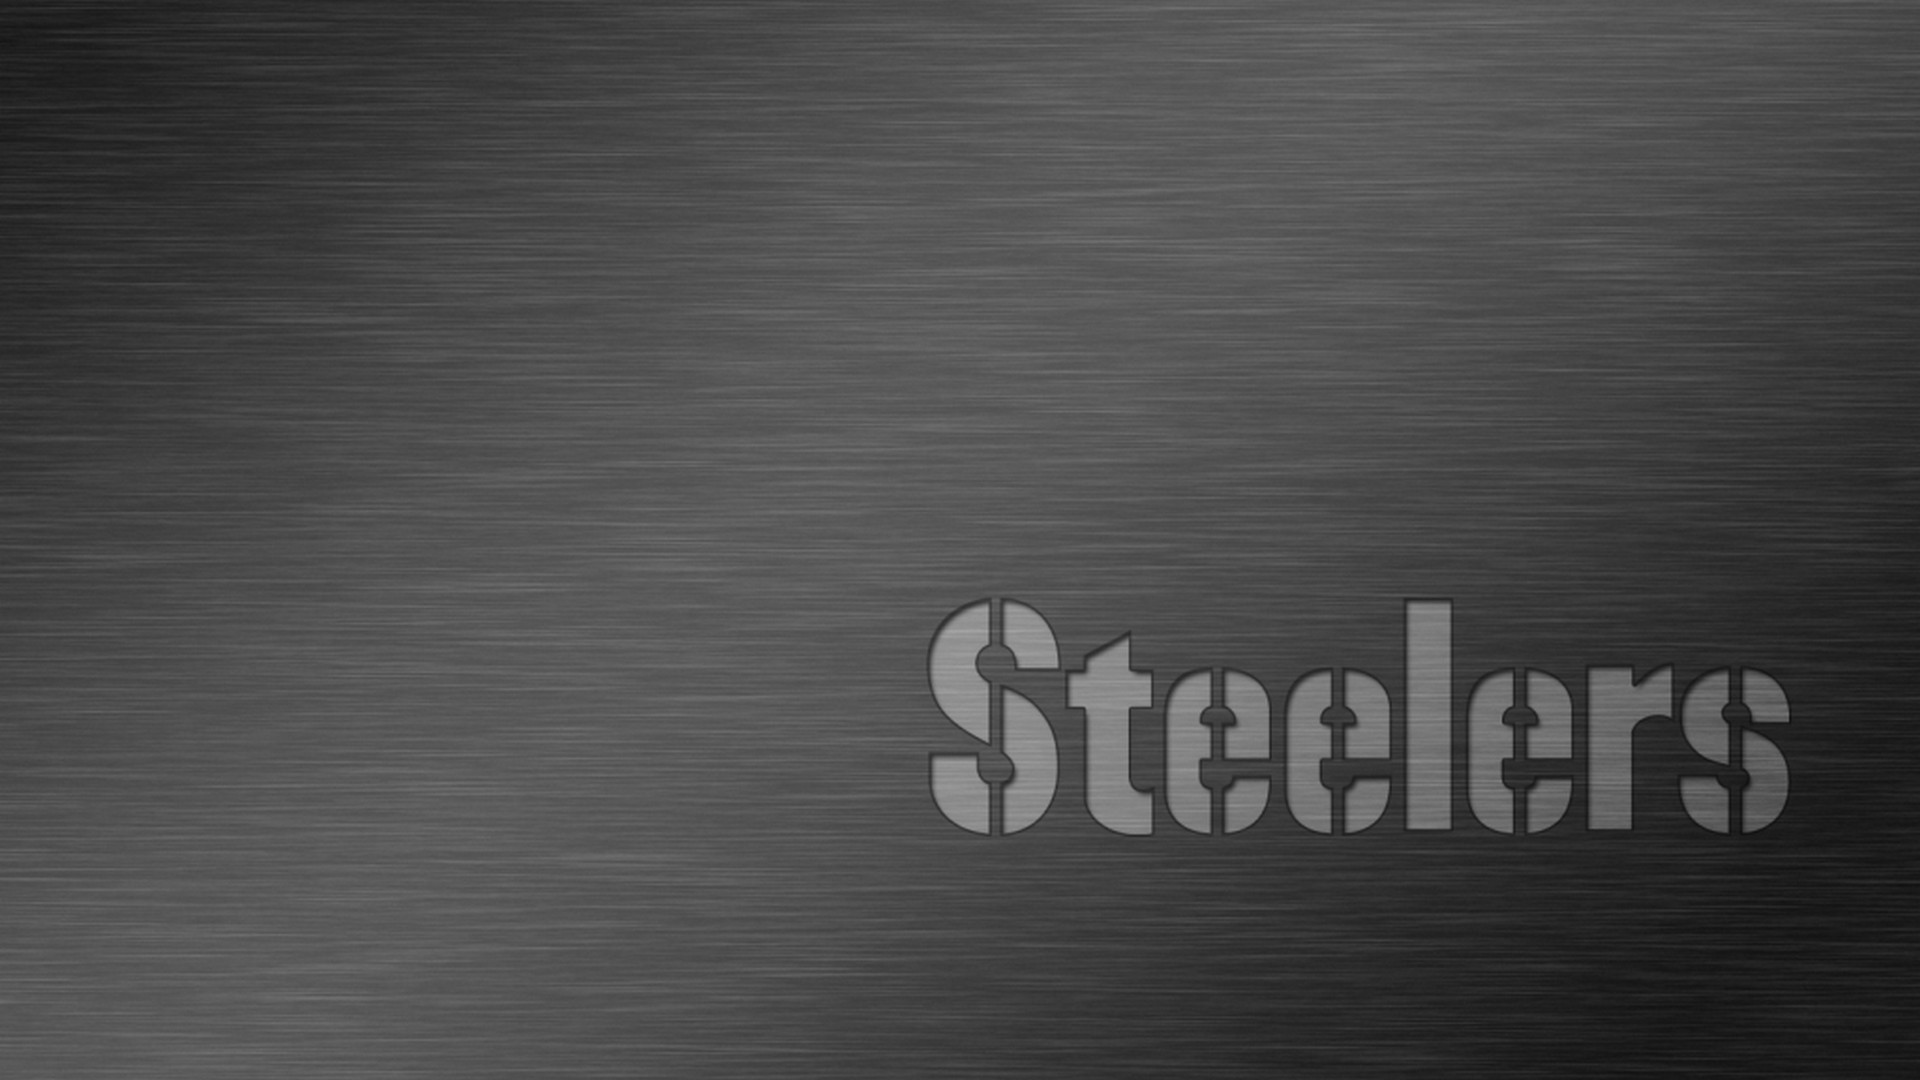 NFL Steelers Wallpaper HD With Resolution 1920X1080 pixel. You can make this wallpaper for your Mac or Windows Desktop Background, iPhone, Android or Tablet and another Smartphone device for free